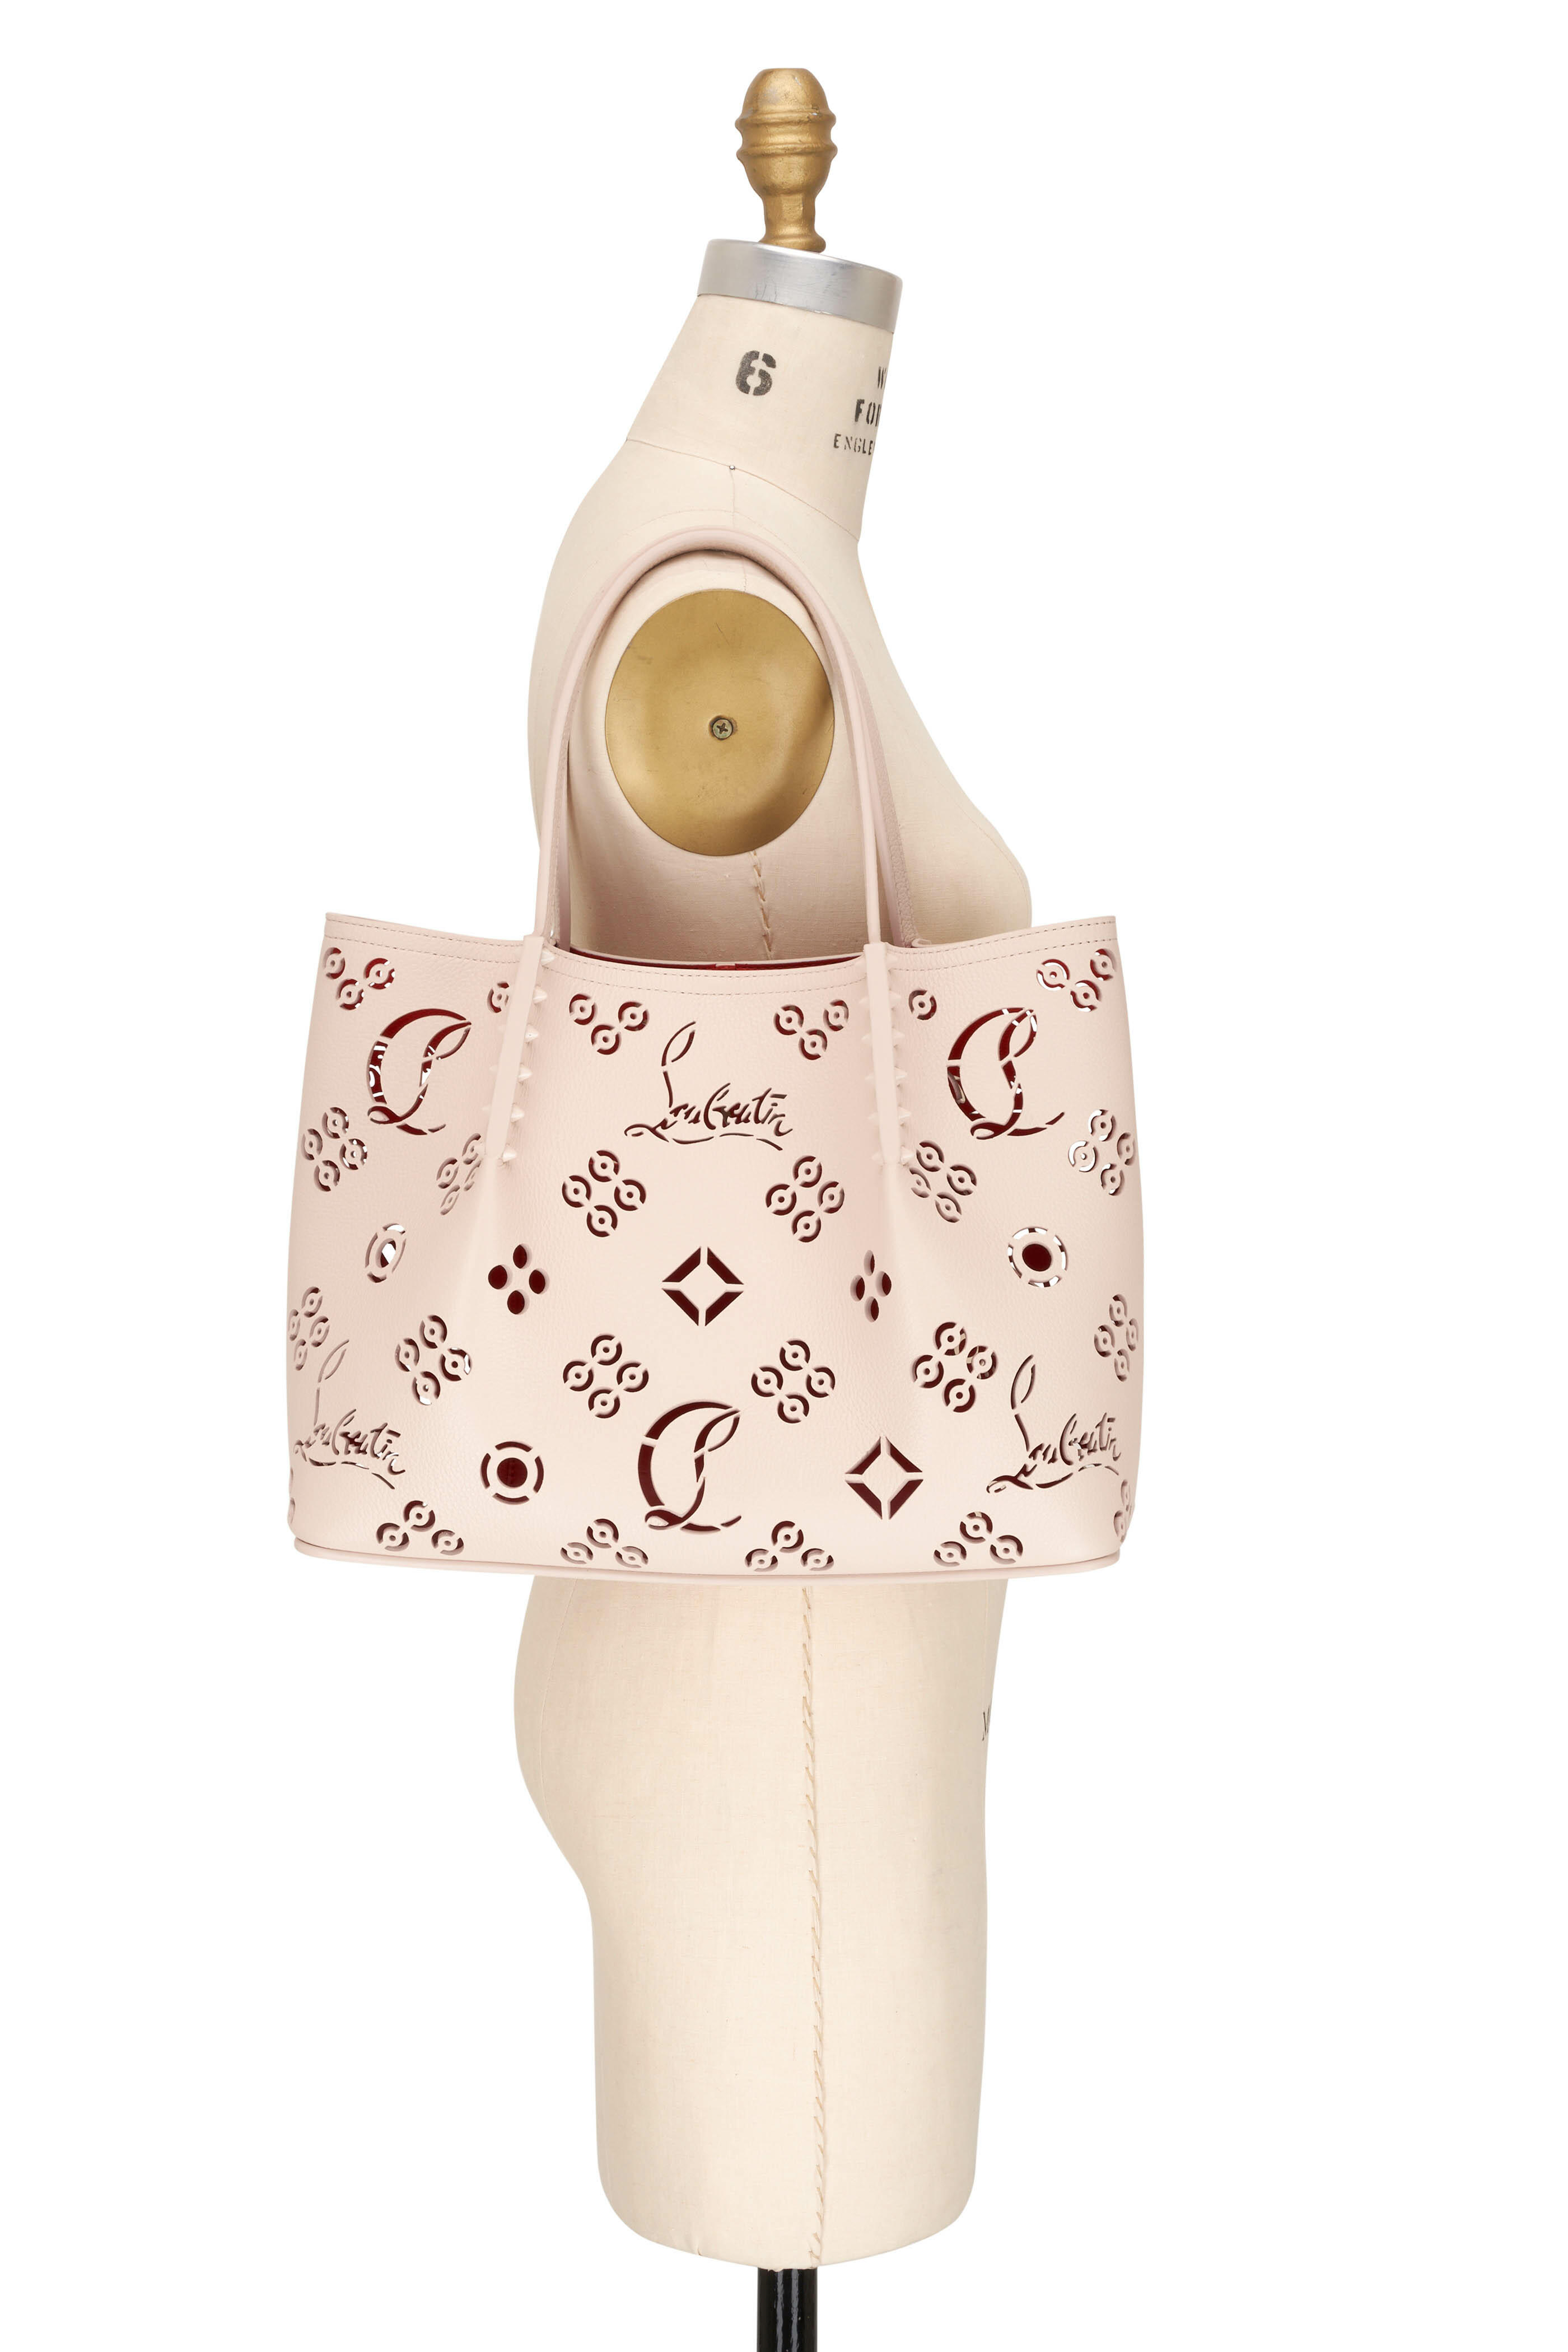 Cabarock Perforated Tote Bag in Brown - Christian Louboutin